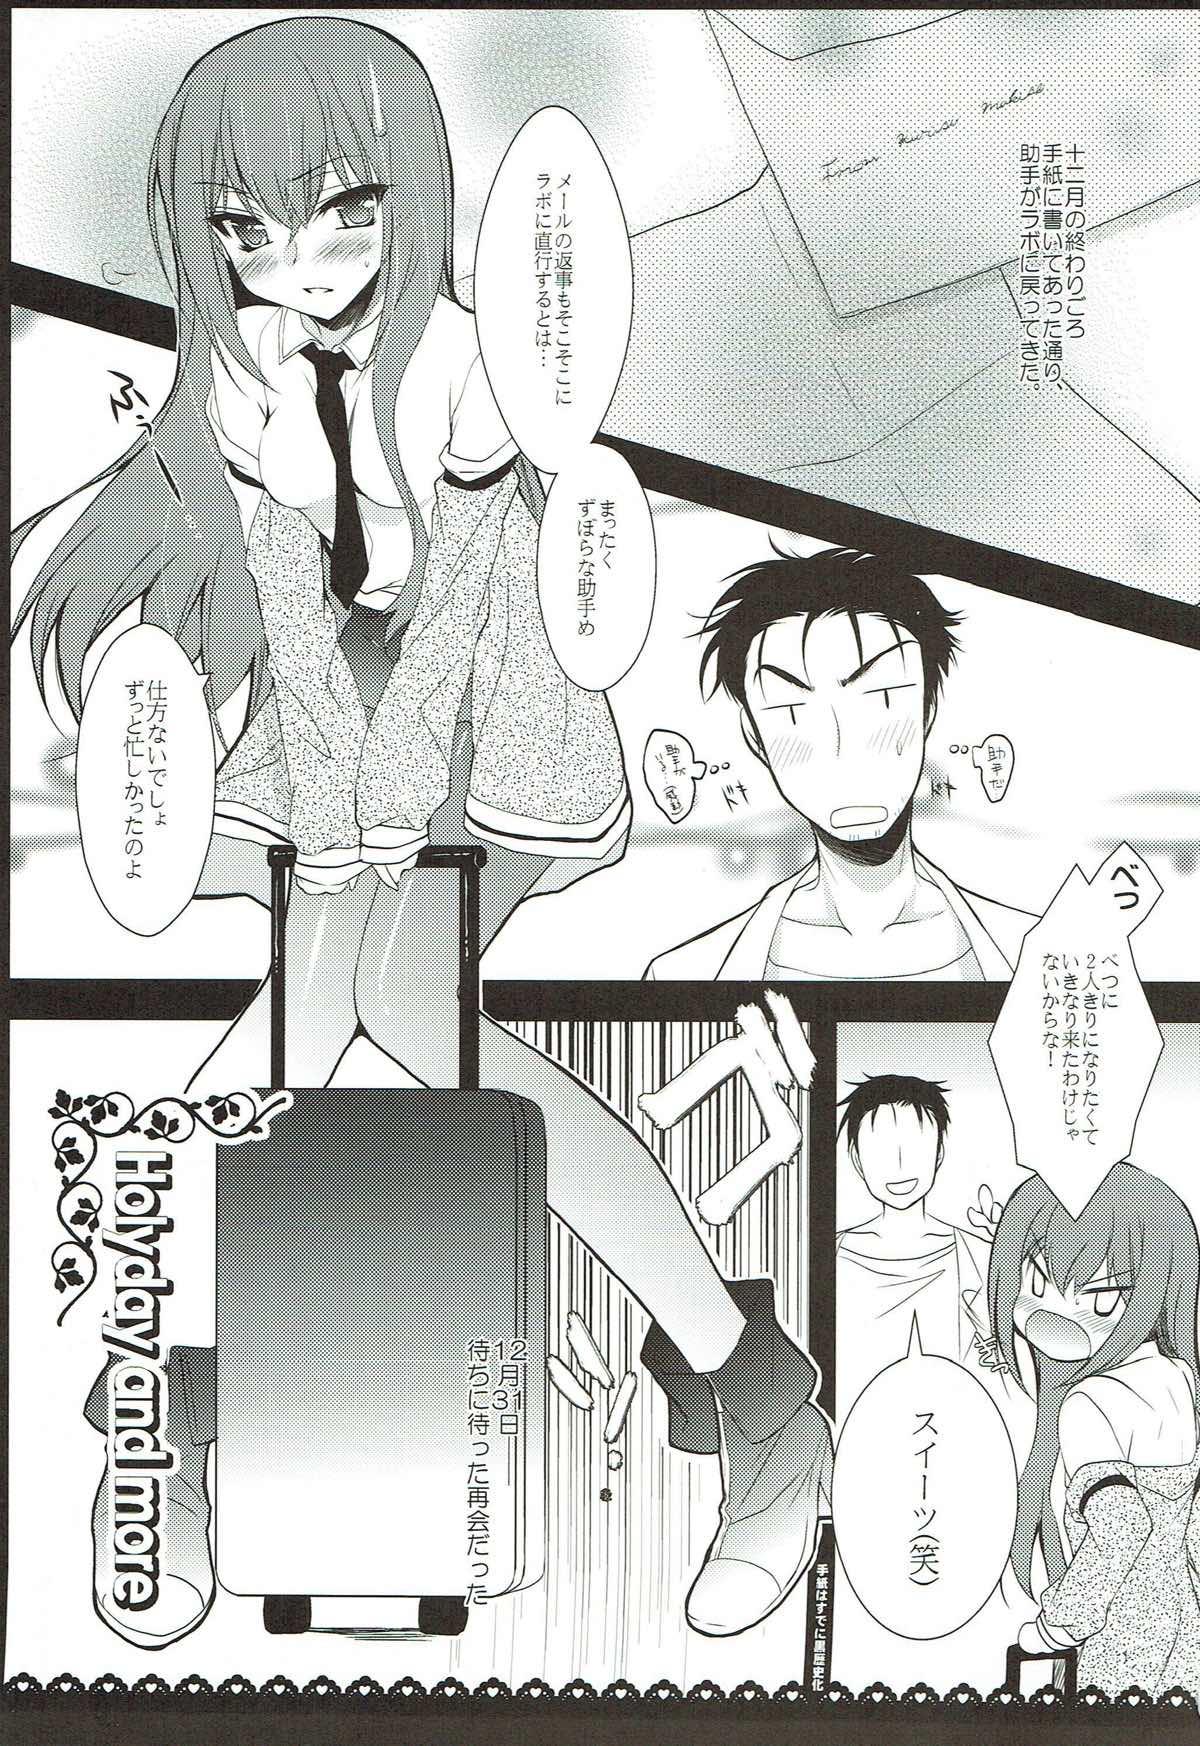 Top Holyday and more - Steinsgate Secret - Page 2